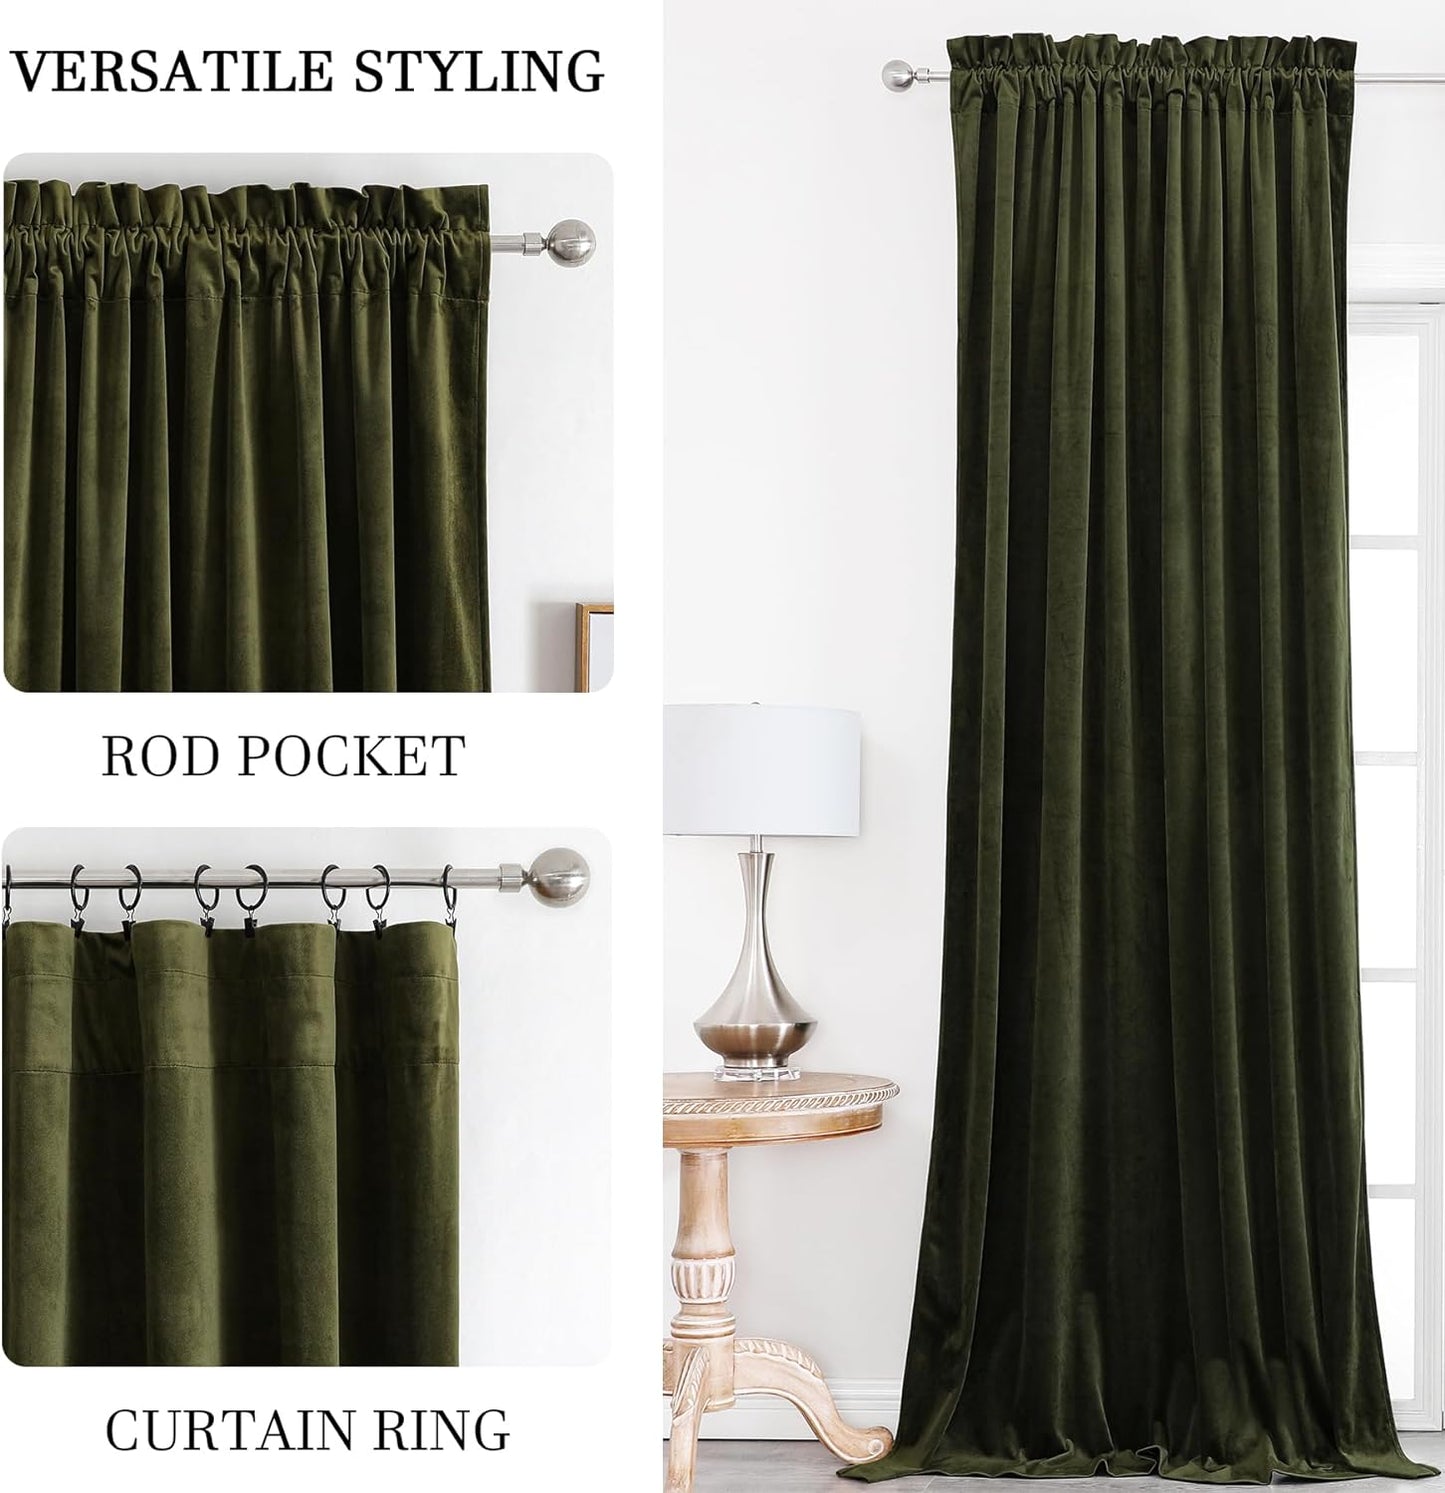 Dchola Olive Green Velvet Curtains for Bedroom Window, Super Soft Vintage Luxury Heavy Drapes, Room Darkening Rod Pocket Curtain for Living Room, W52 by L84 Inches, 2 Panels  Dchola   